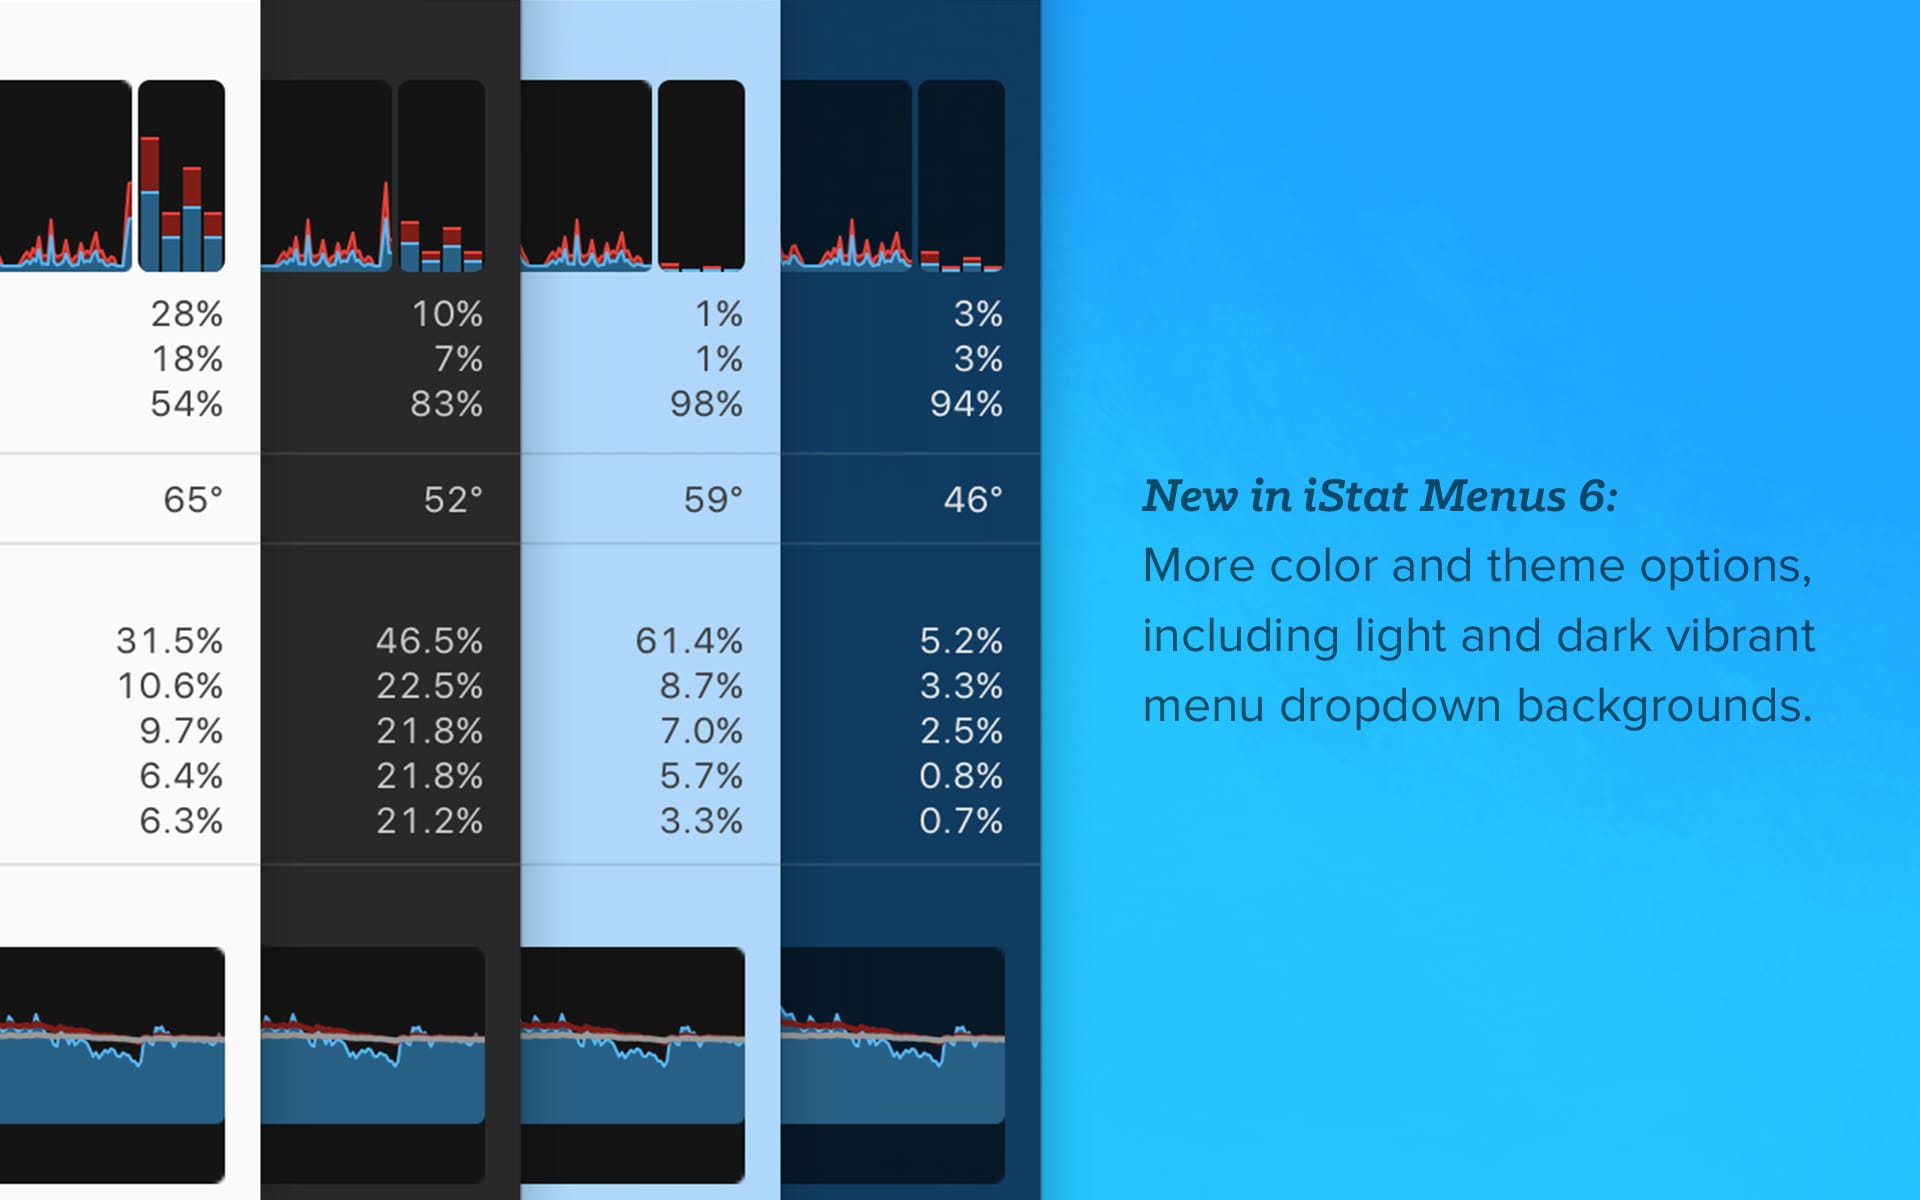 how can you remive istat menus from the bar